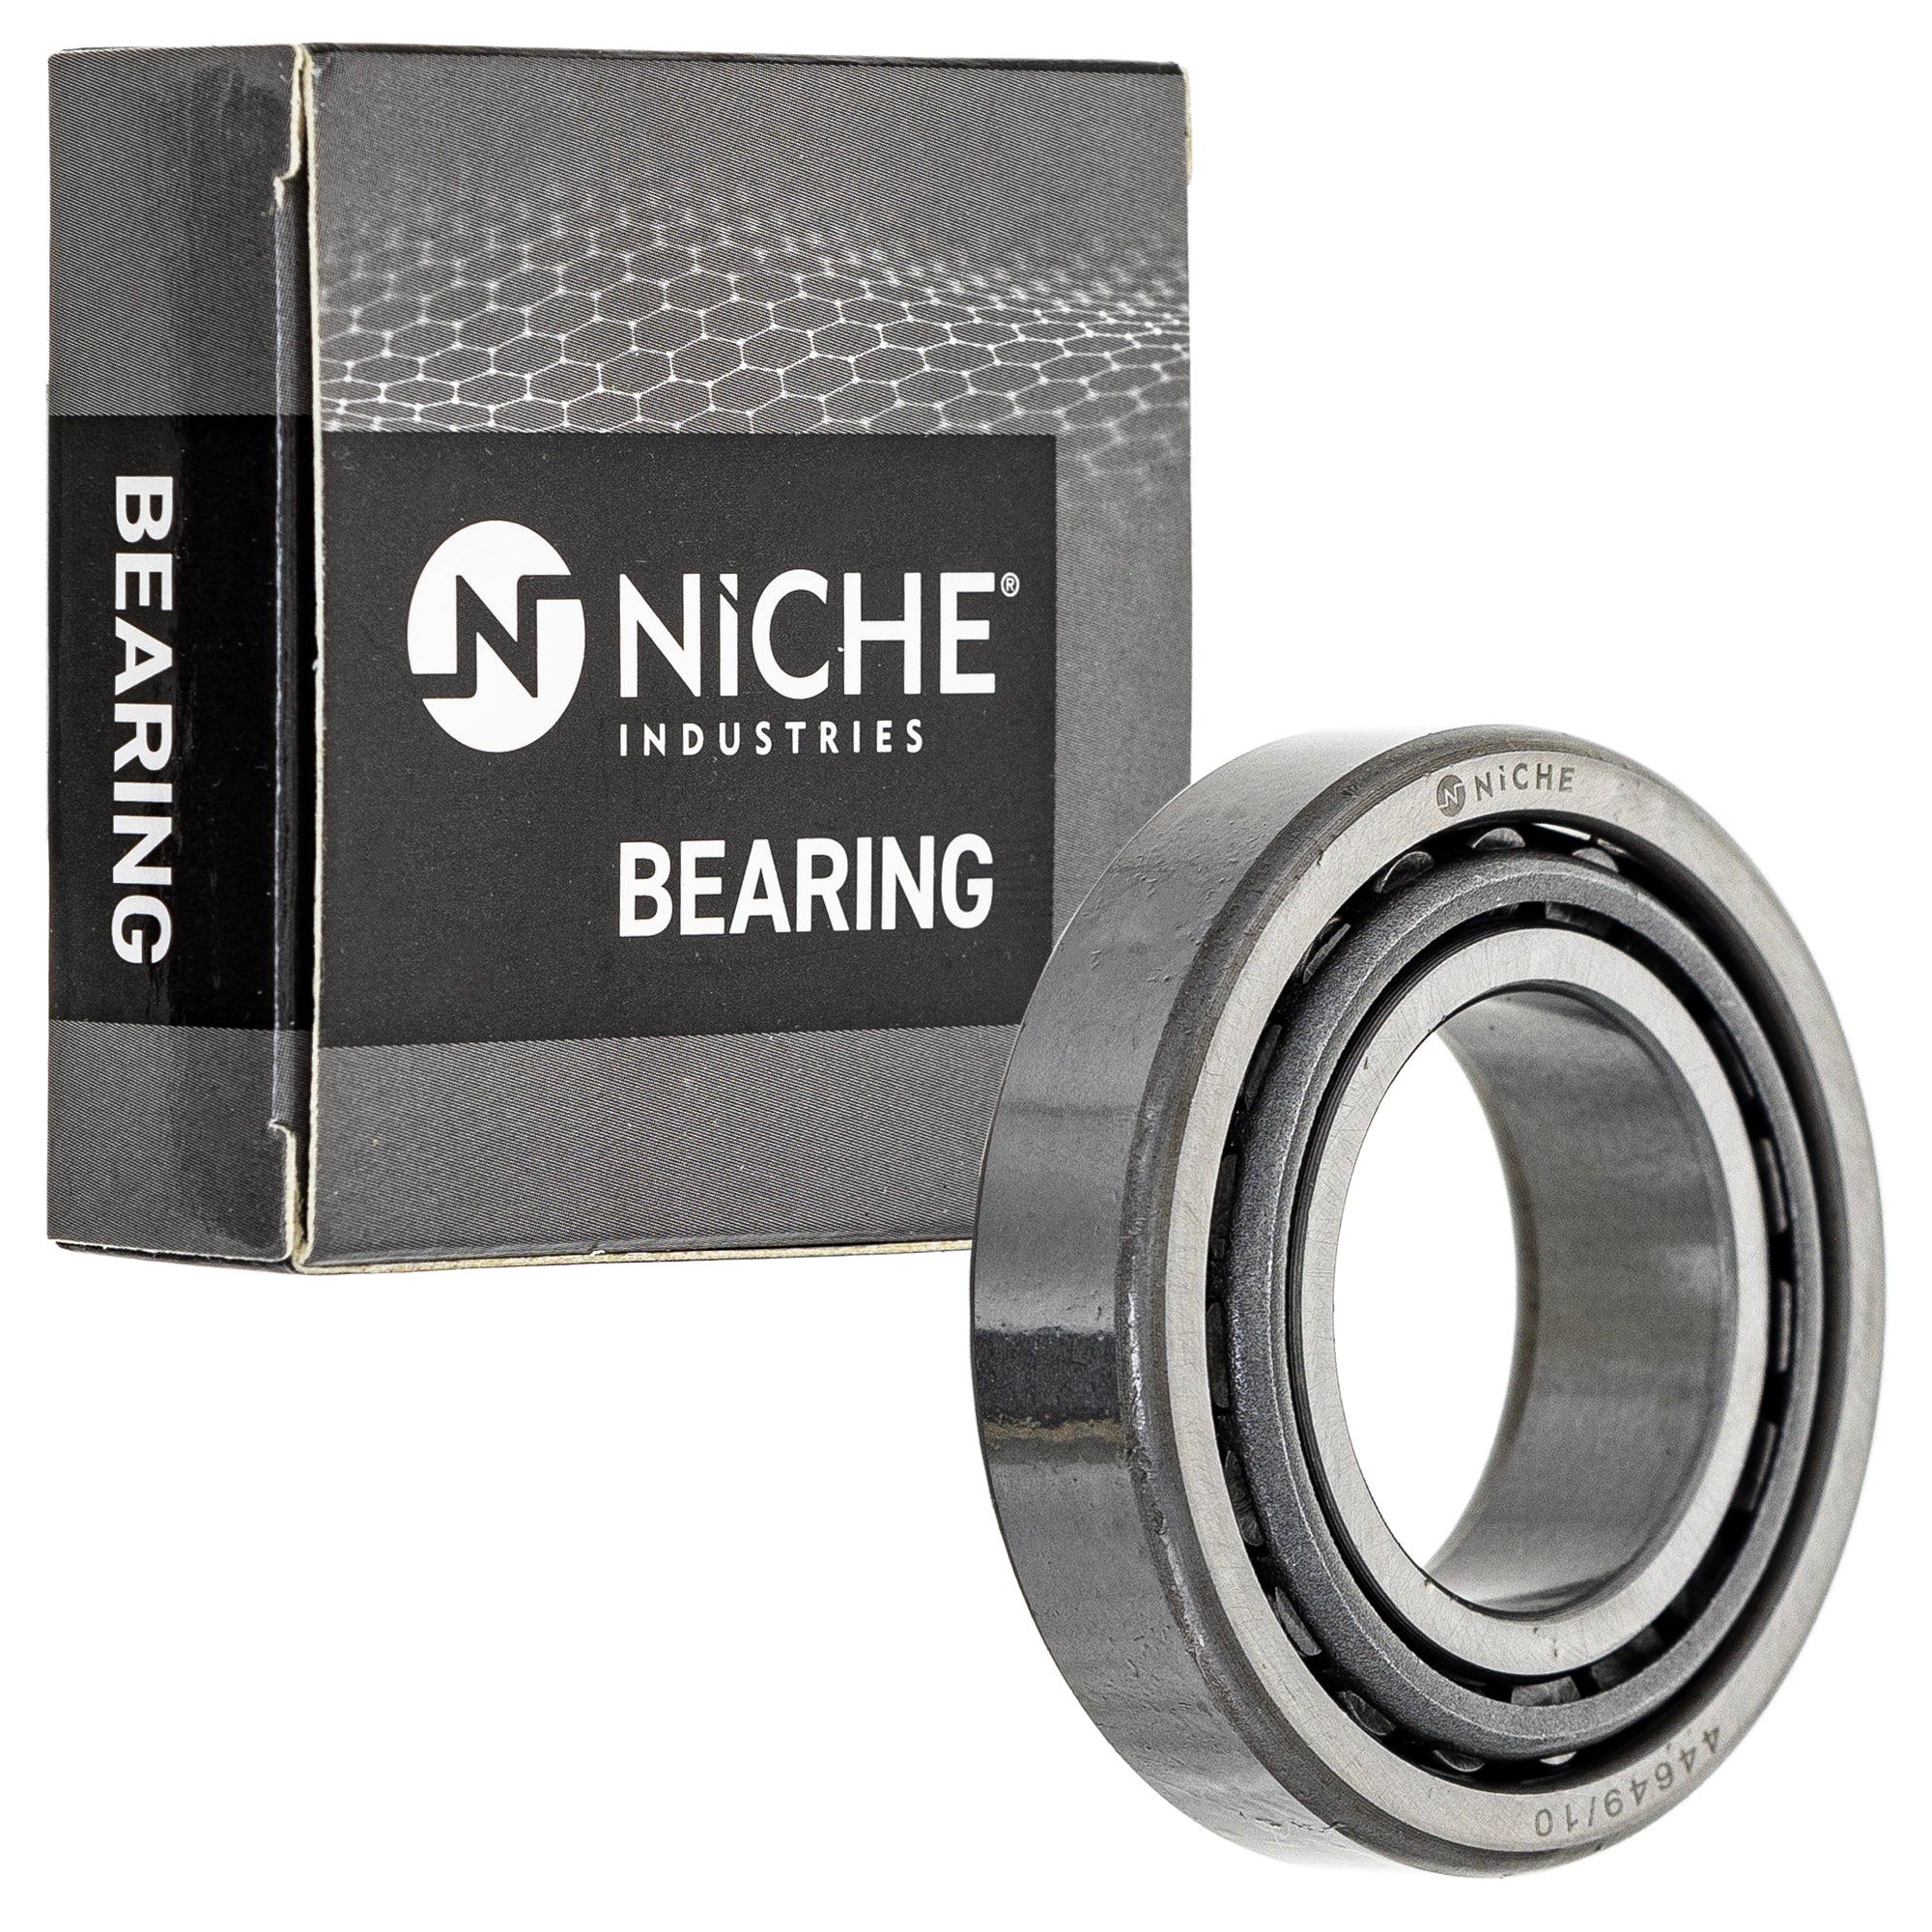 NICHE 519-CBB2268R Bearing 10-Pack for zOTHER Xplorer Xpedition